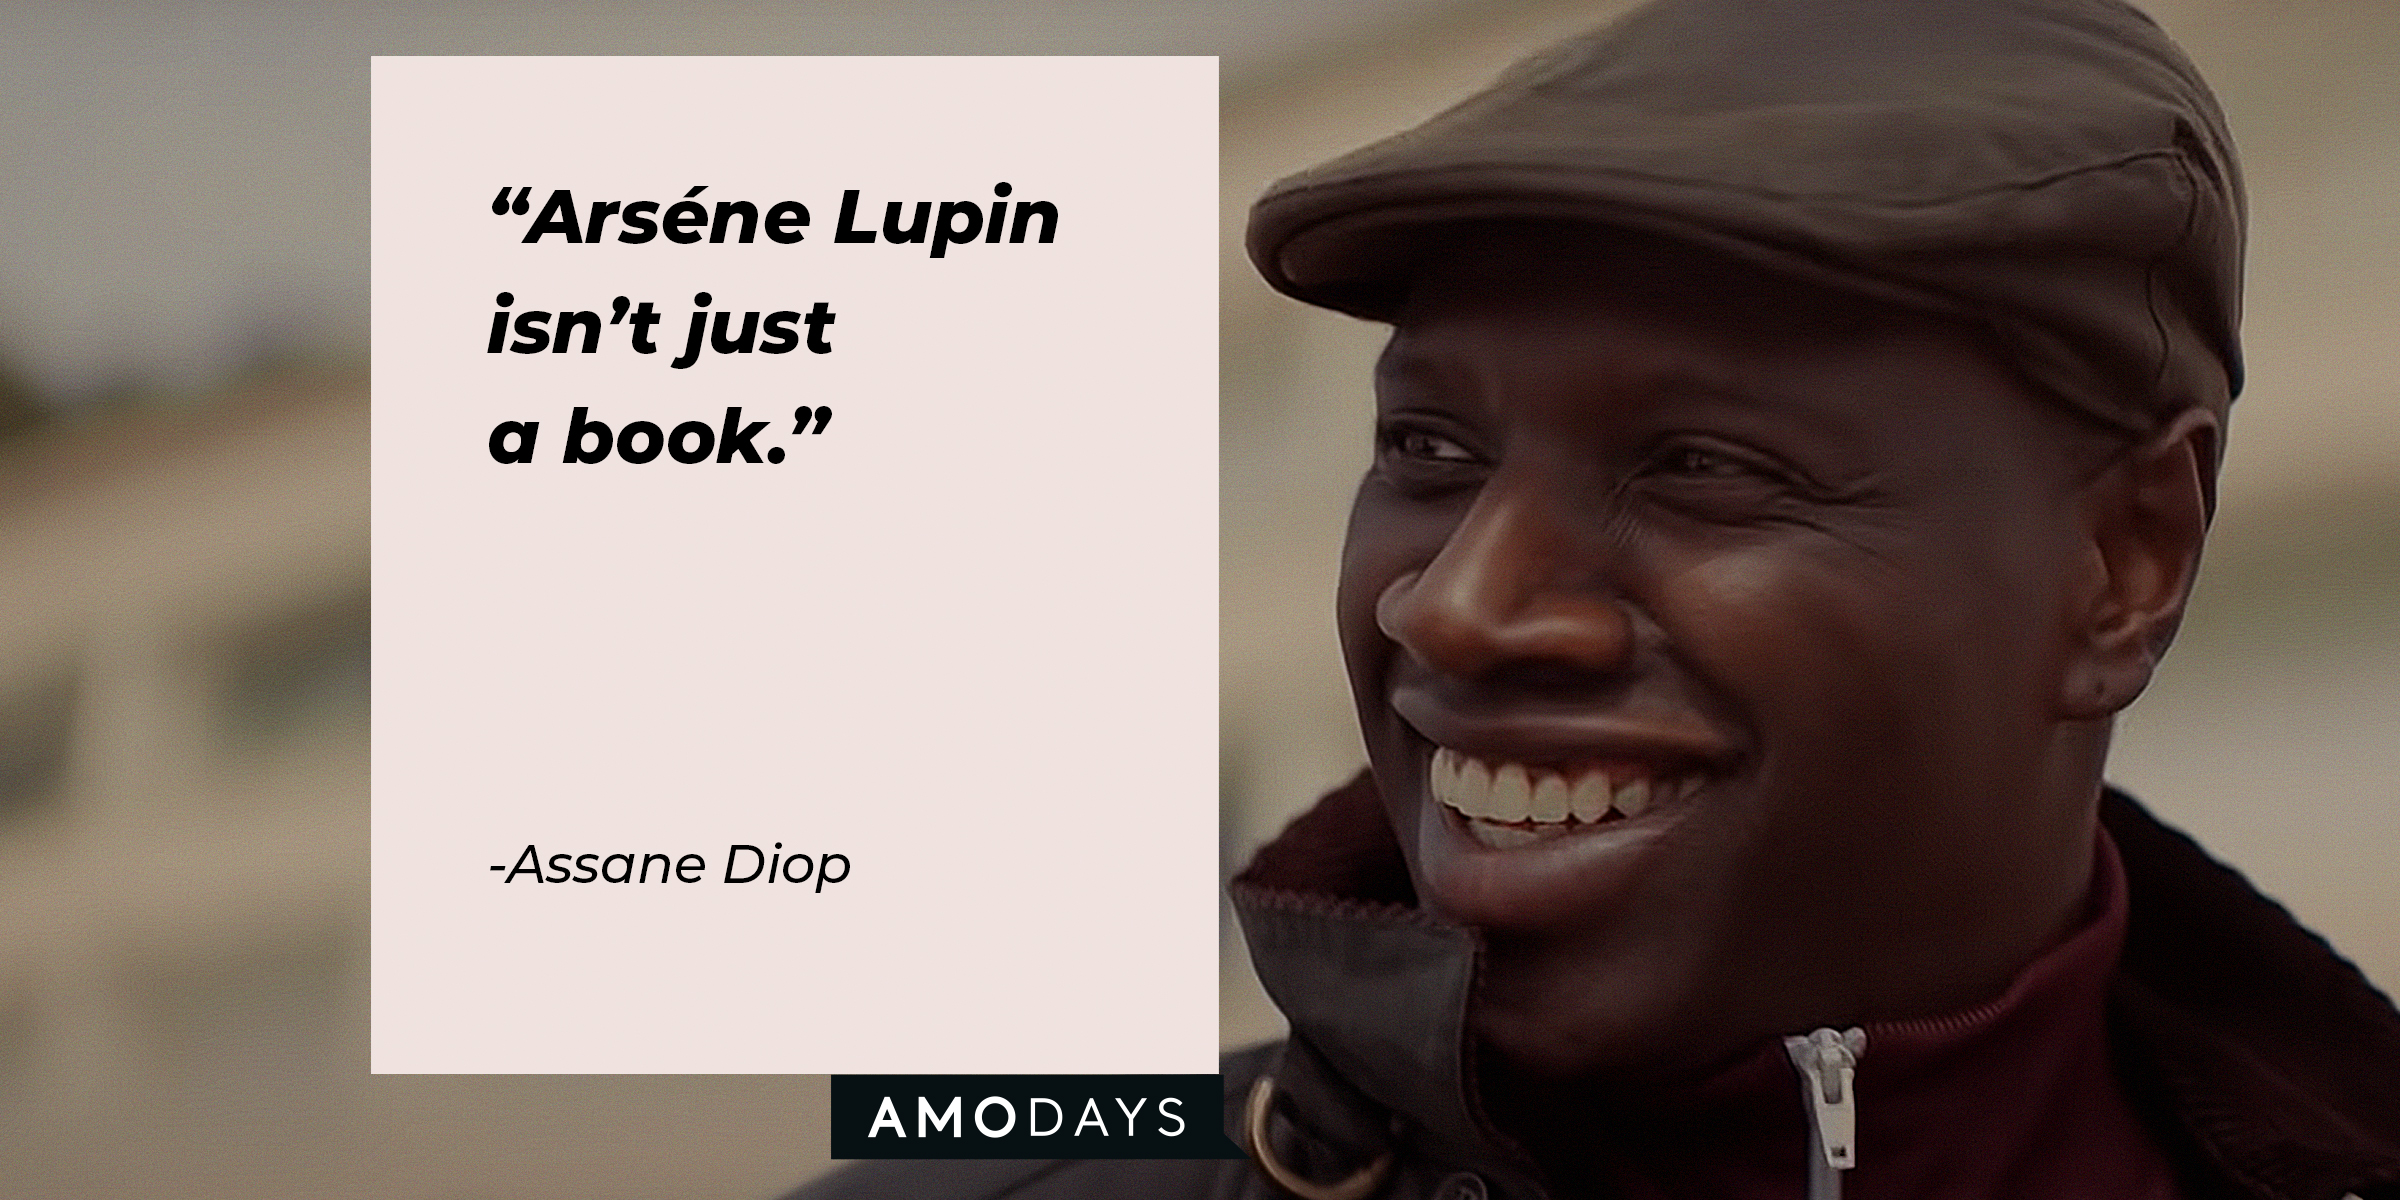 Assane Diop's quote: "Arsène Lupin isn't just a book." | Image: Amodays